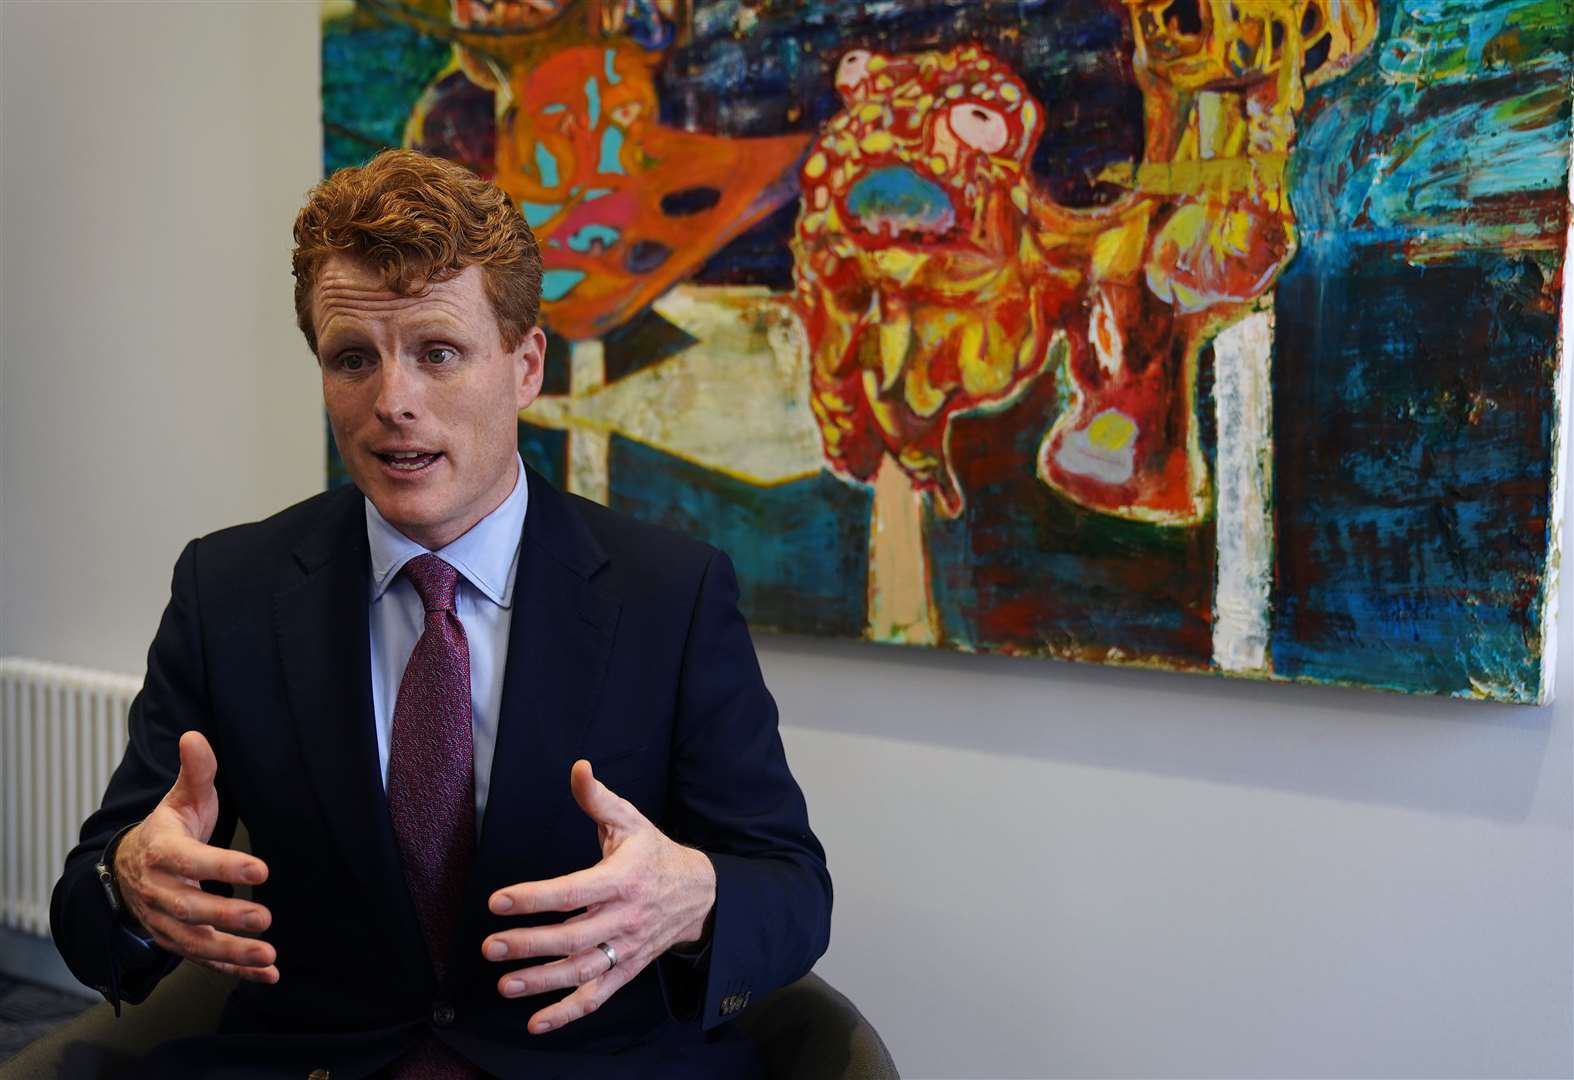 US Special Envoy to Northern Ireland for Economic Affairs, Congressman Joe Kennedy III during the international conference to mark the 25th anniversary of the Belfast/Good Friday Agreement, at Queen’s University Belfast (Brian Lawless/PA)